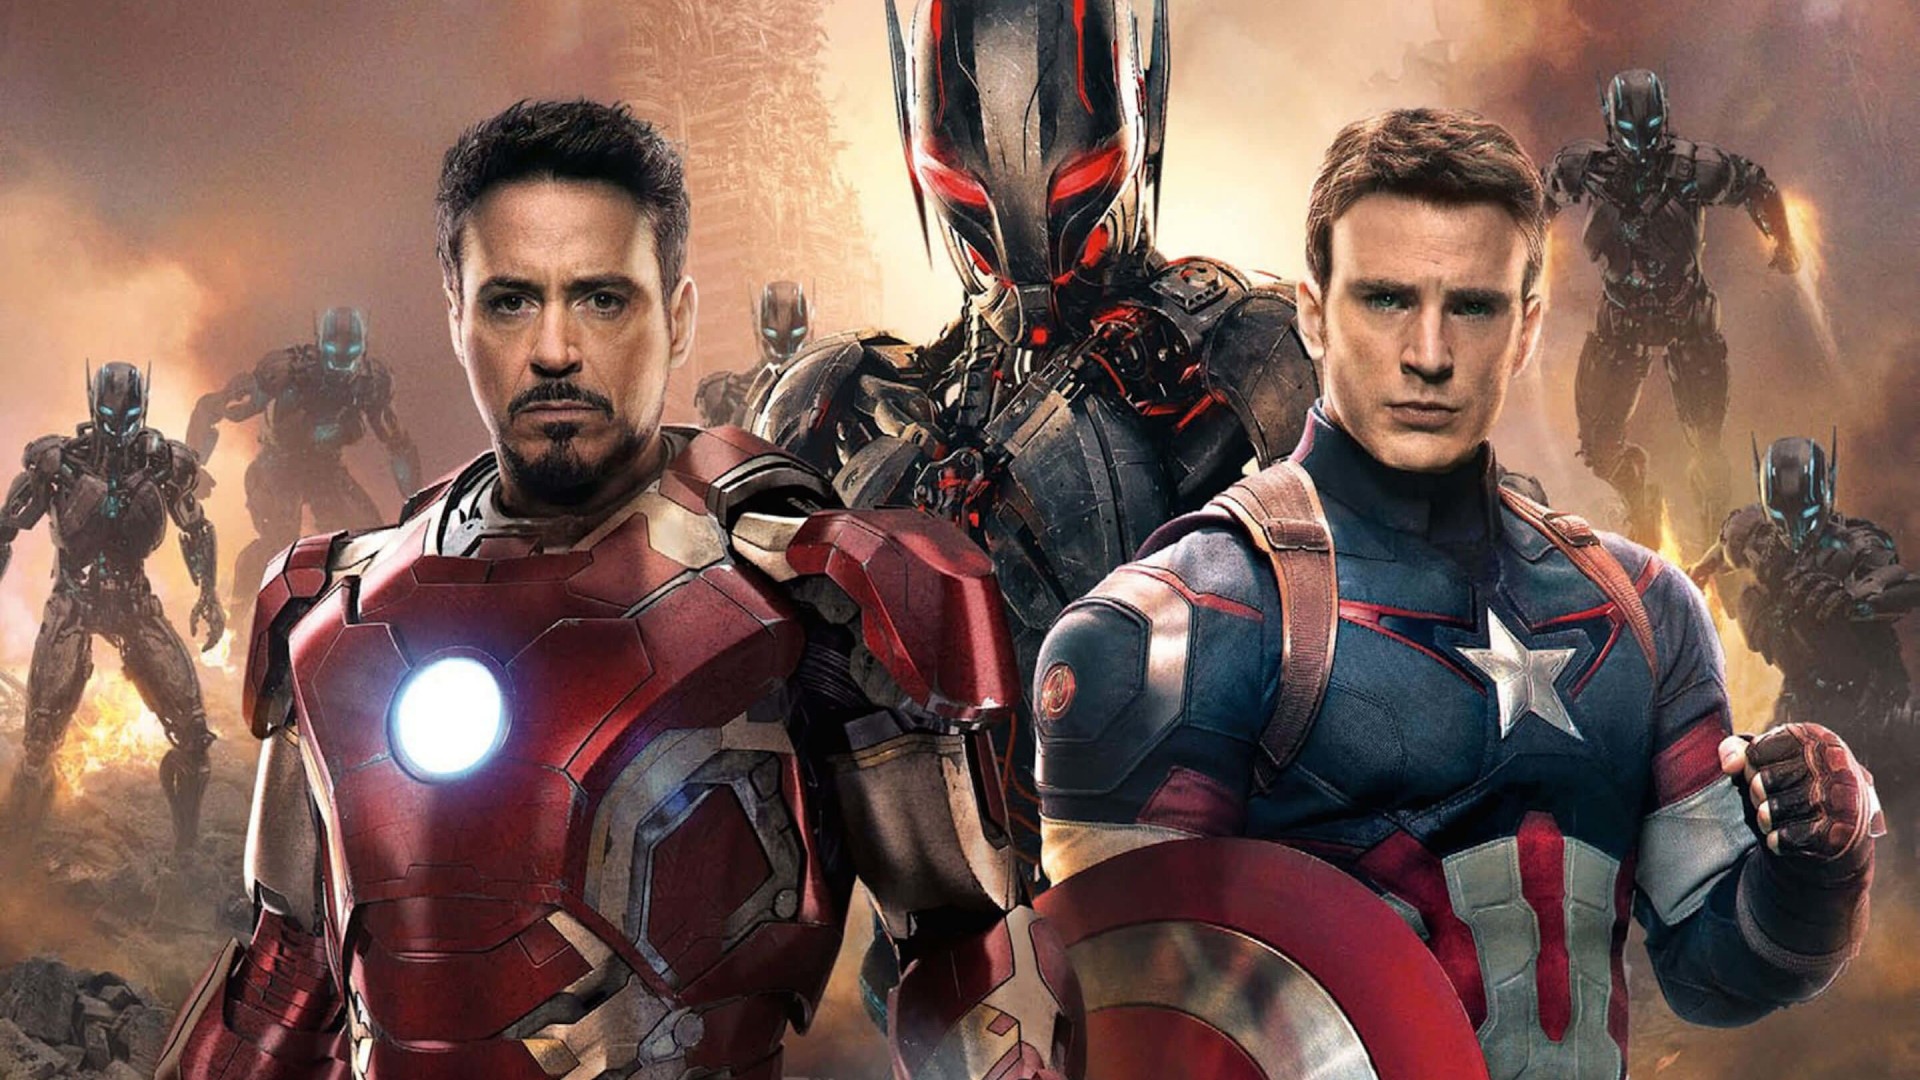 The Avengers: Age of Ultron - Iron Man and Captain America Wallpaper for Desktop 1920x1080